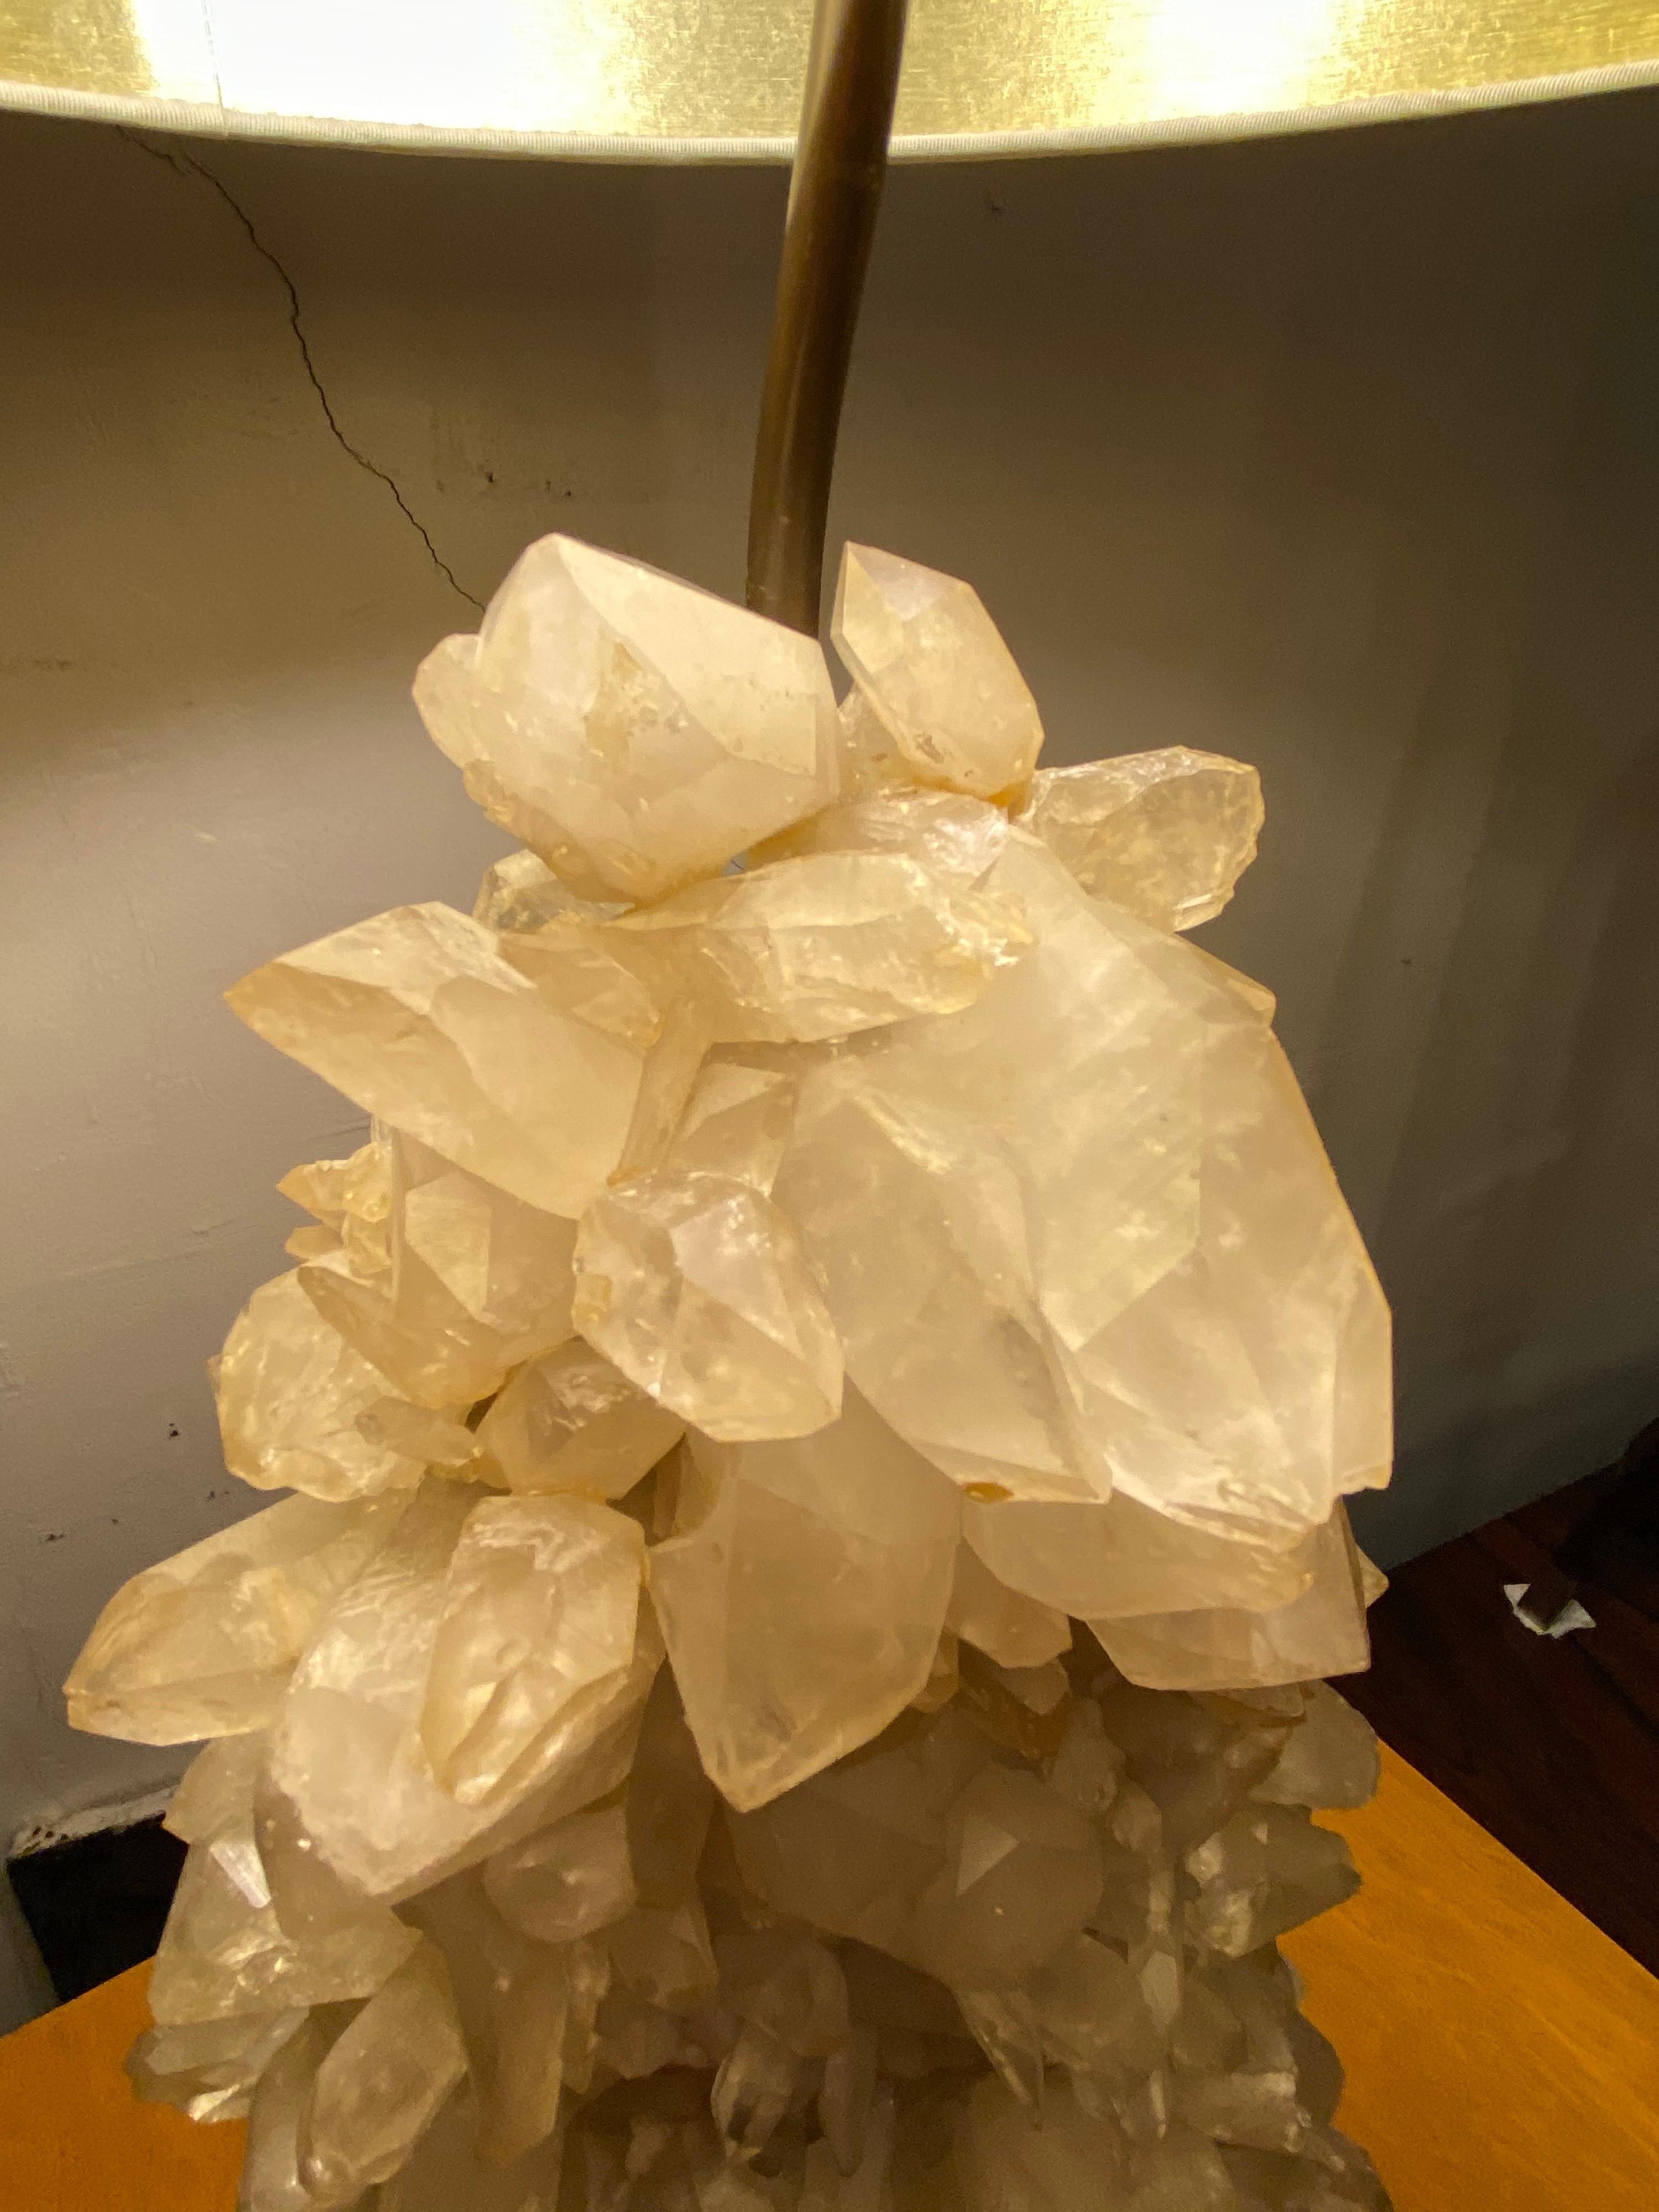 Carole Stupell Quartz crystal cluster table lamp. 1950s lamp made up of rock crystals, attached to a painted wood base. Two Sockets with pull chains. Unique Design that looks amazing lit up! Crystal base is 5